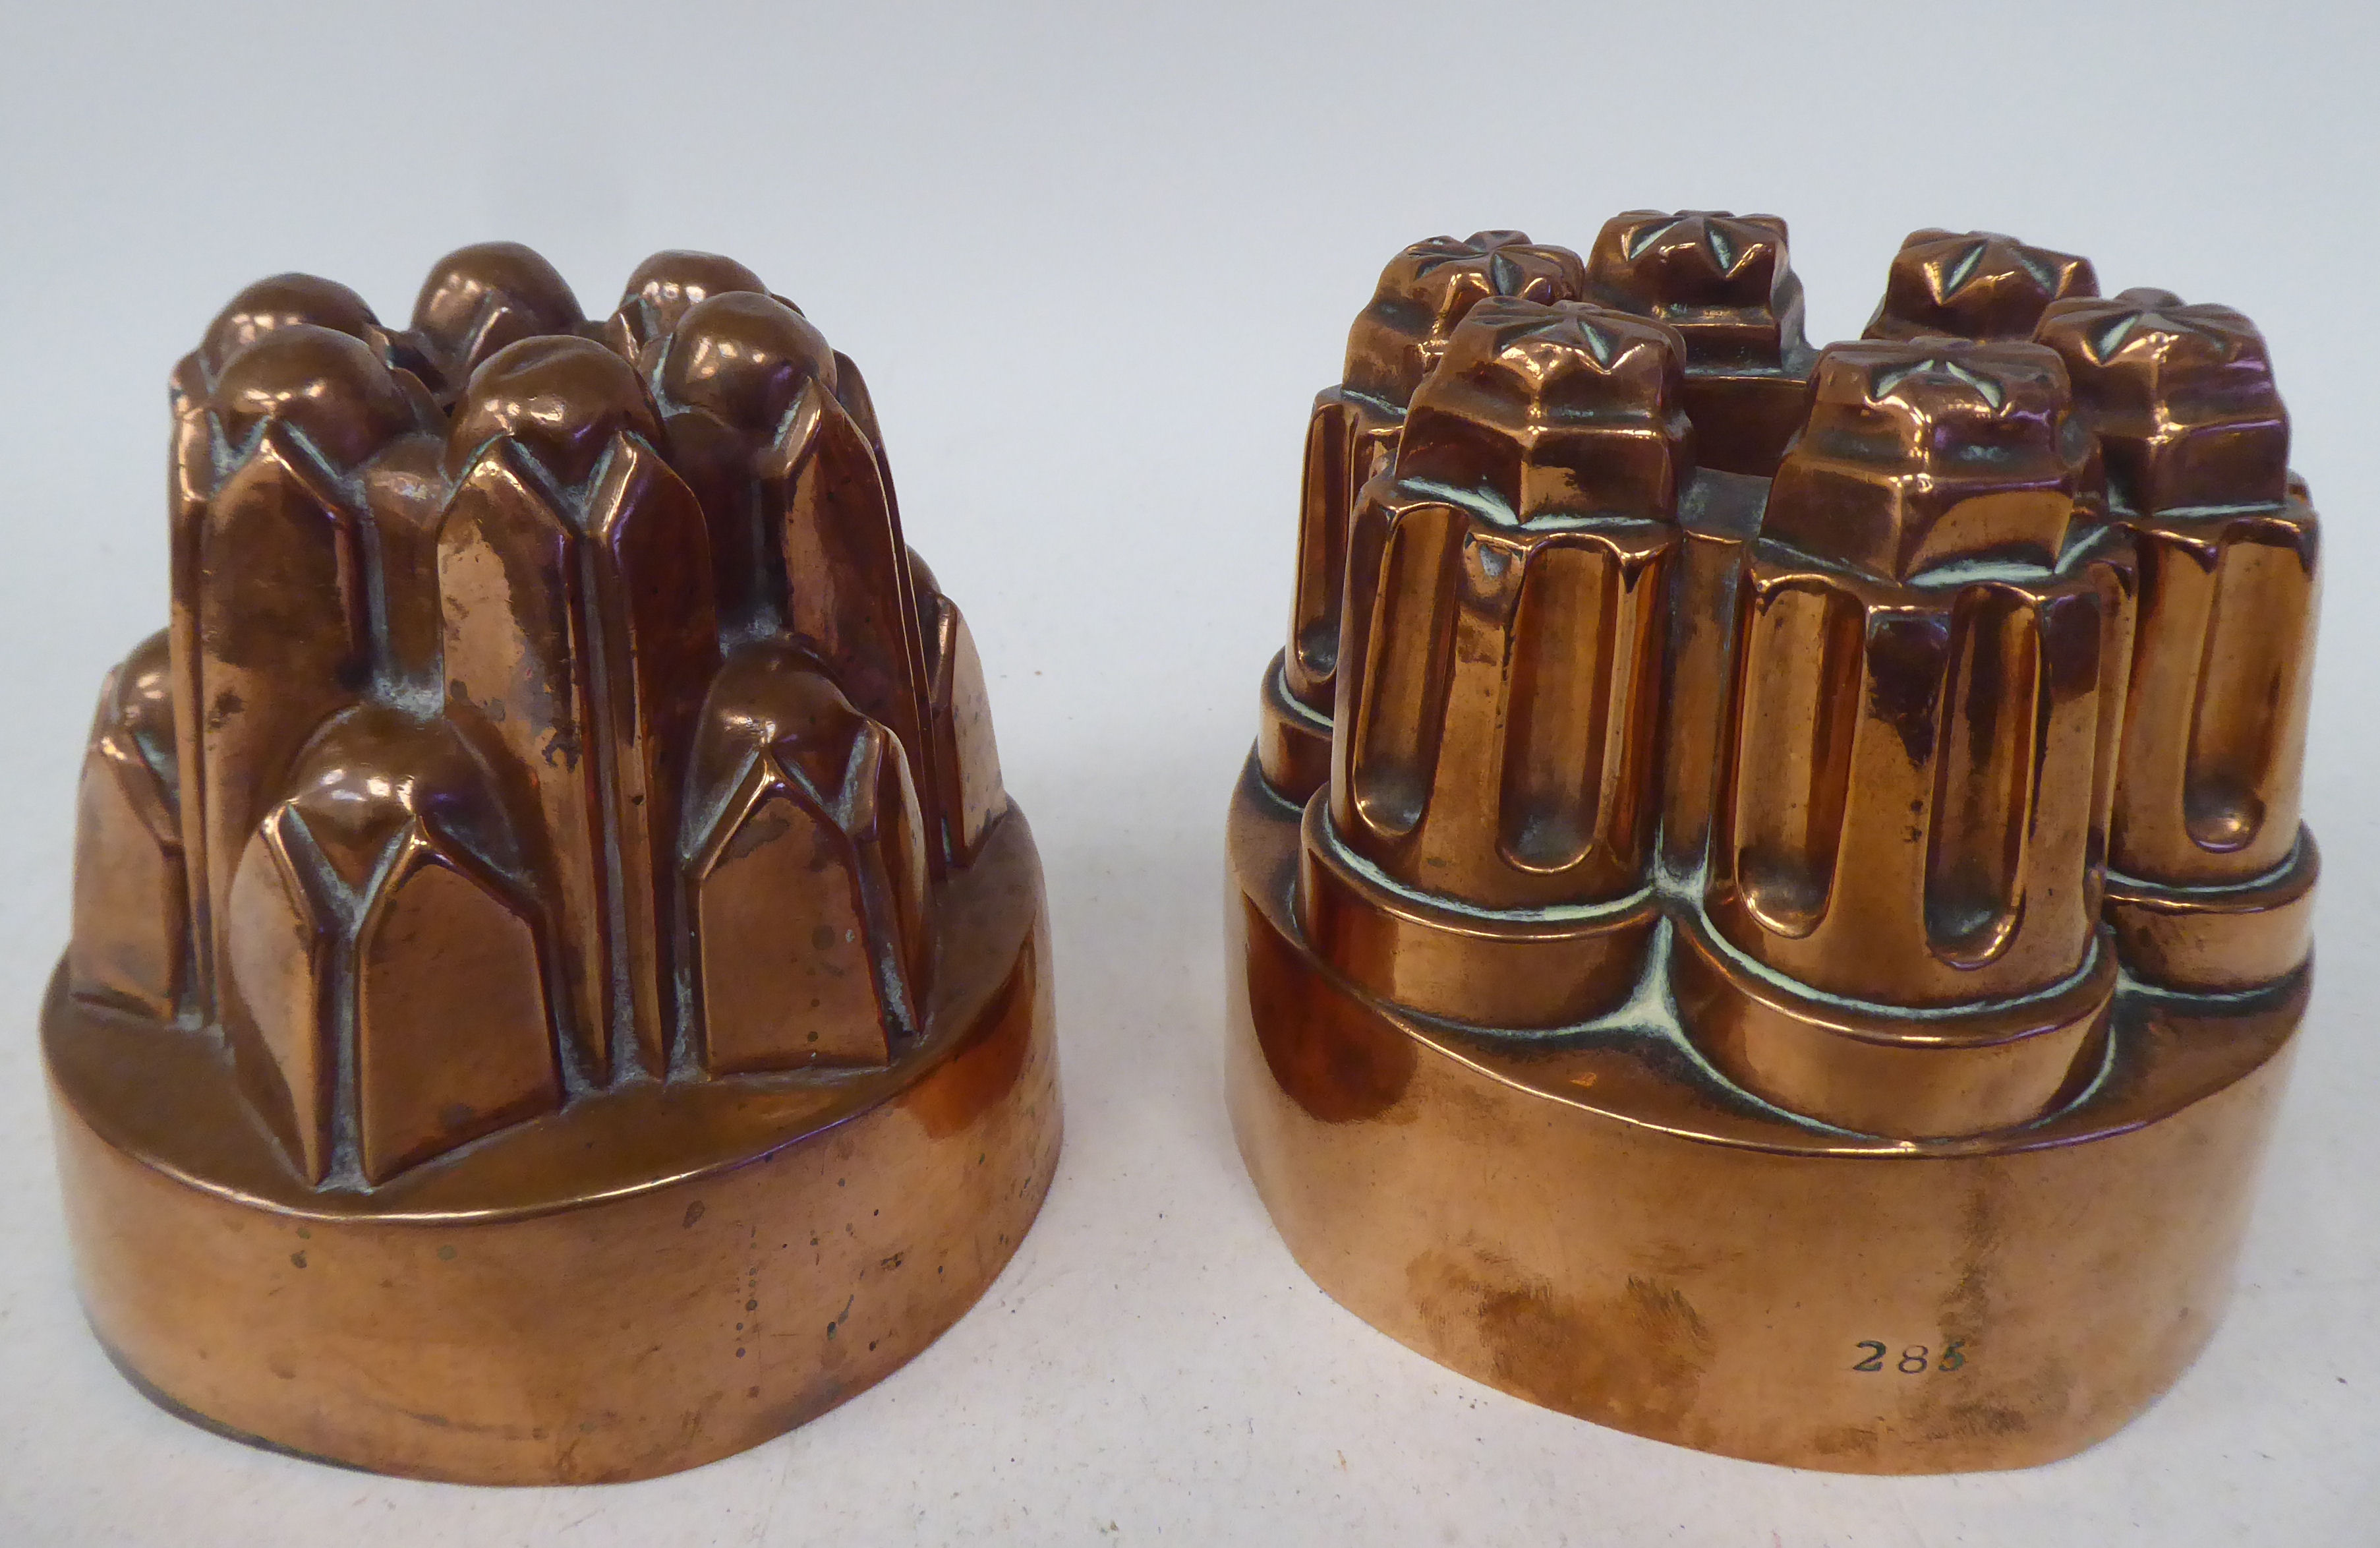 A 19thC copper, circular jelly mould of circular turret design  5"dia; and another, similar  5.25"